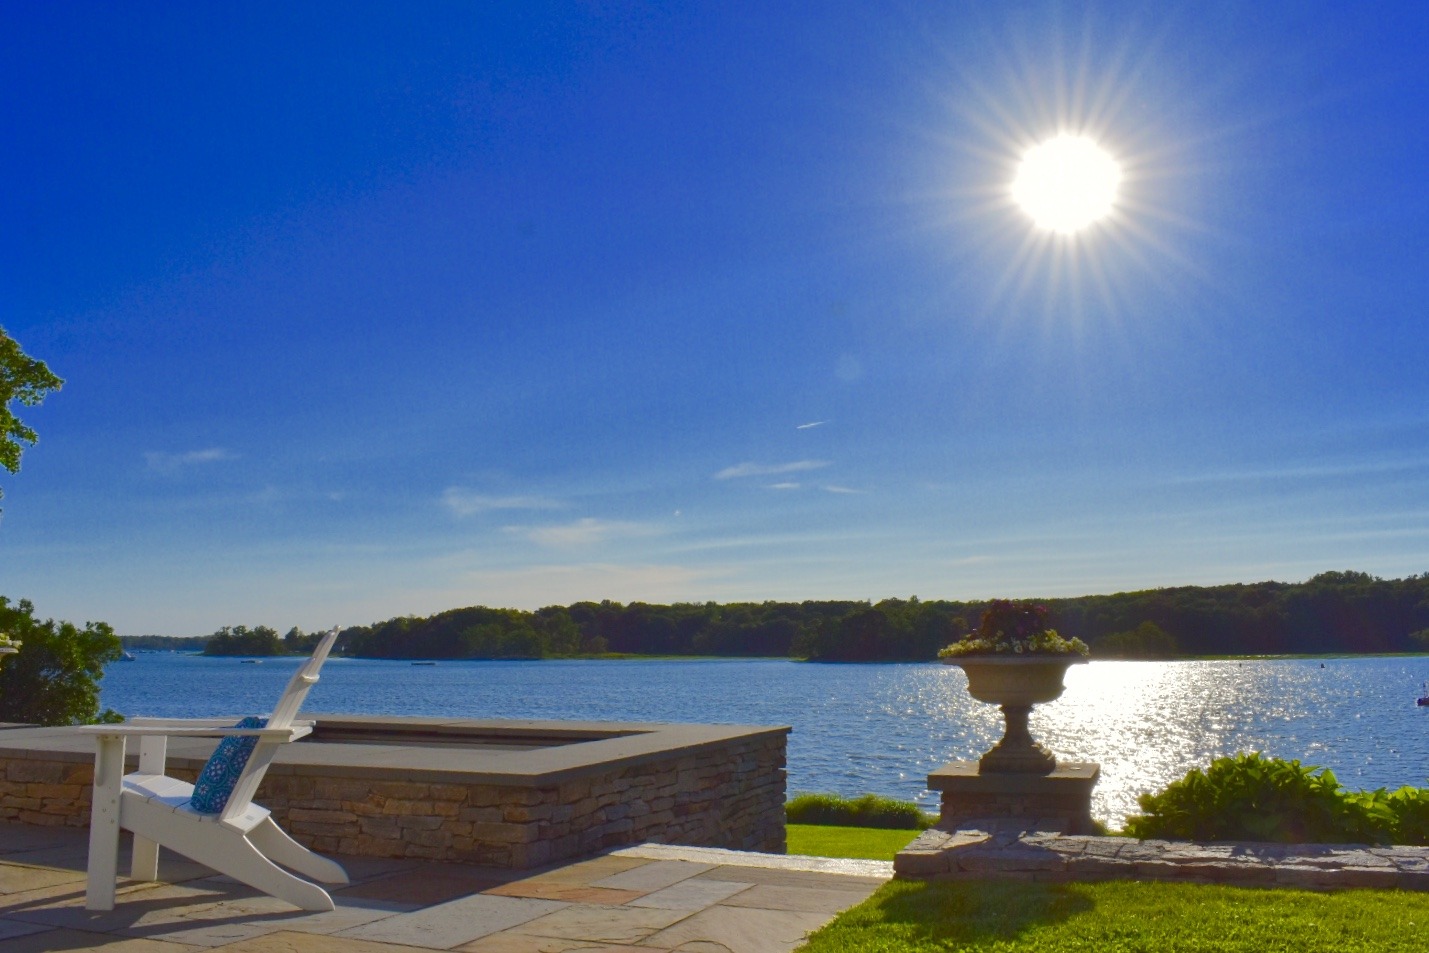 The image shows a tranquil lakeside view with an Adirondack chair on a patio, a stone planter, glistening water, and a bright sun in a clear blue sky.